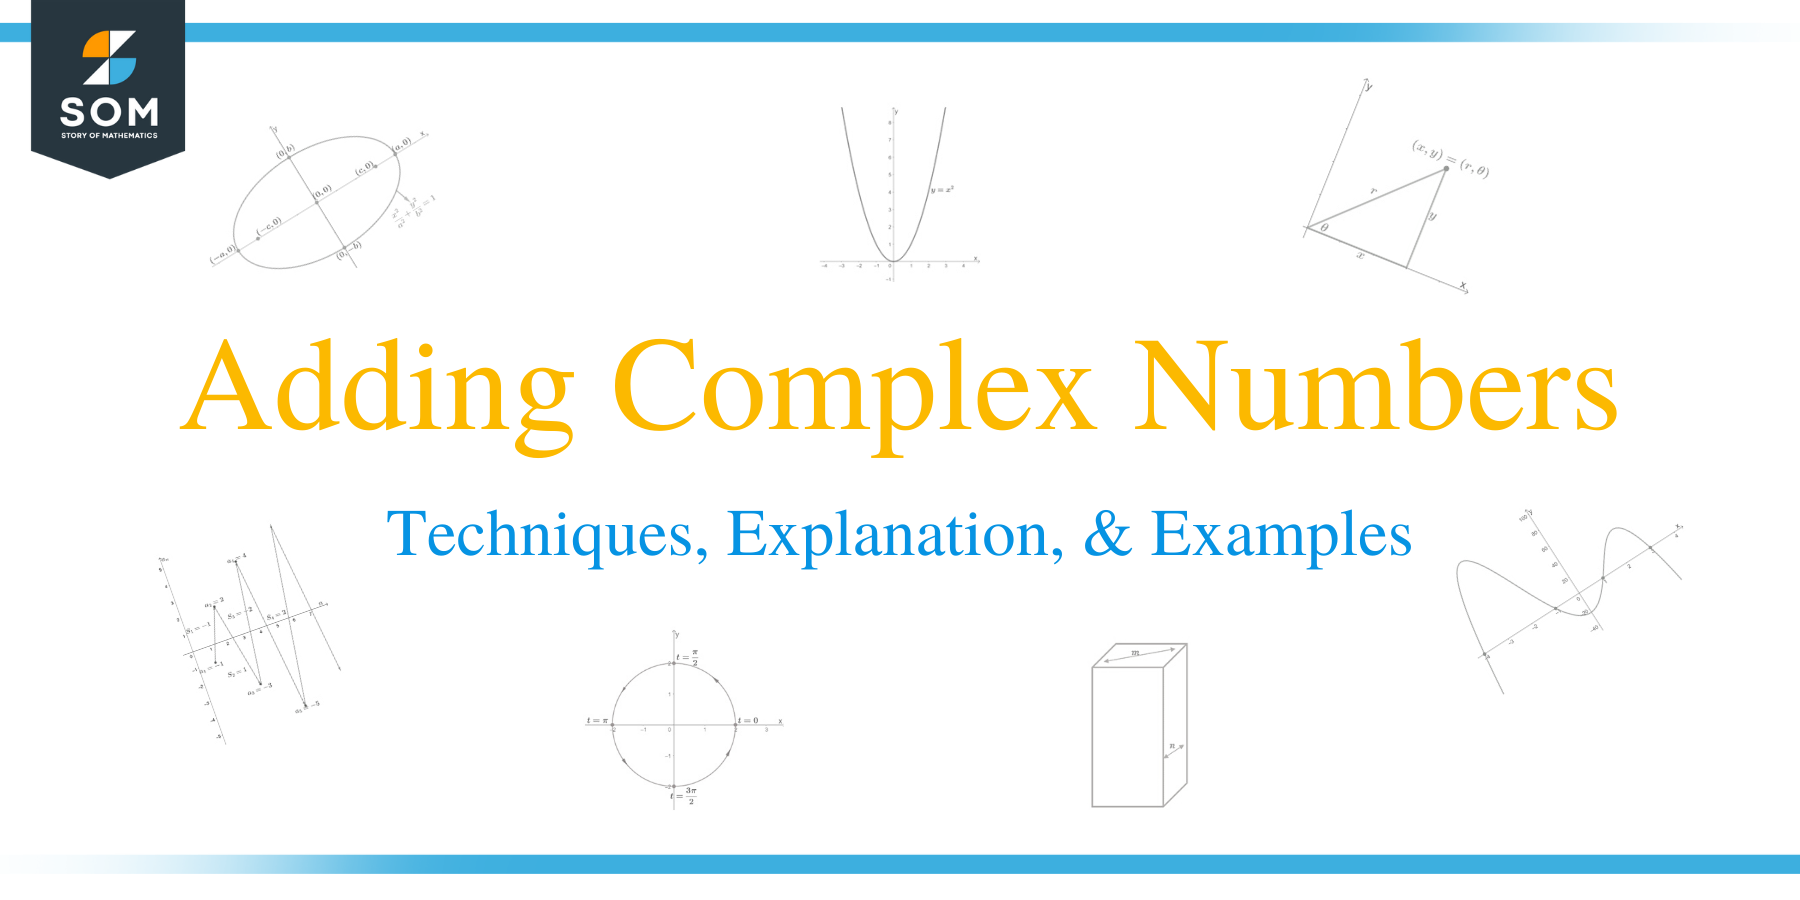 Adding Complex Numbers